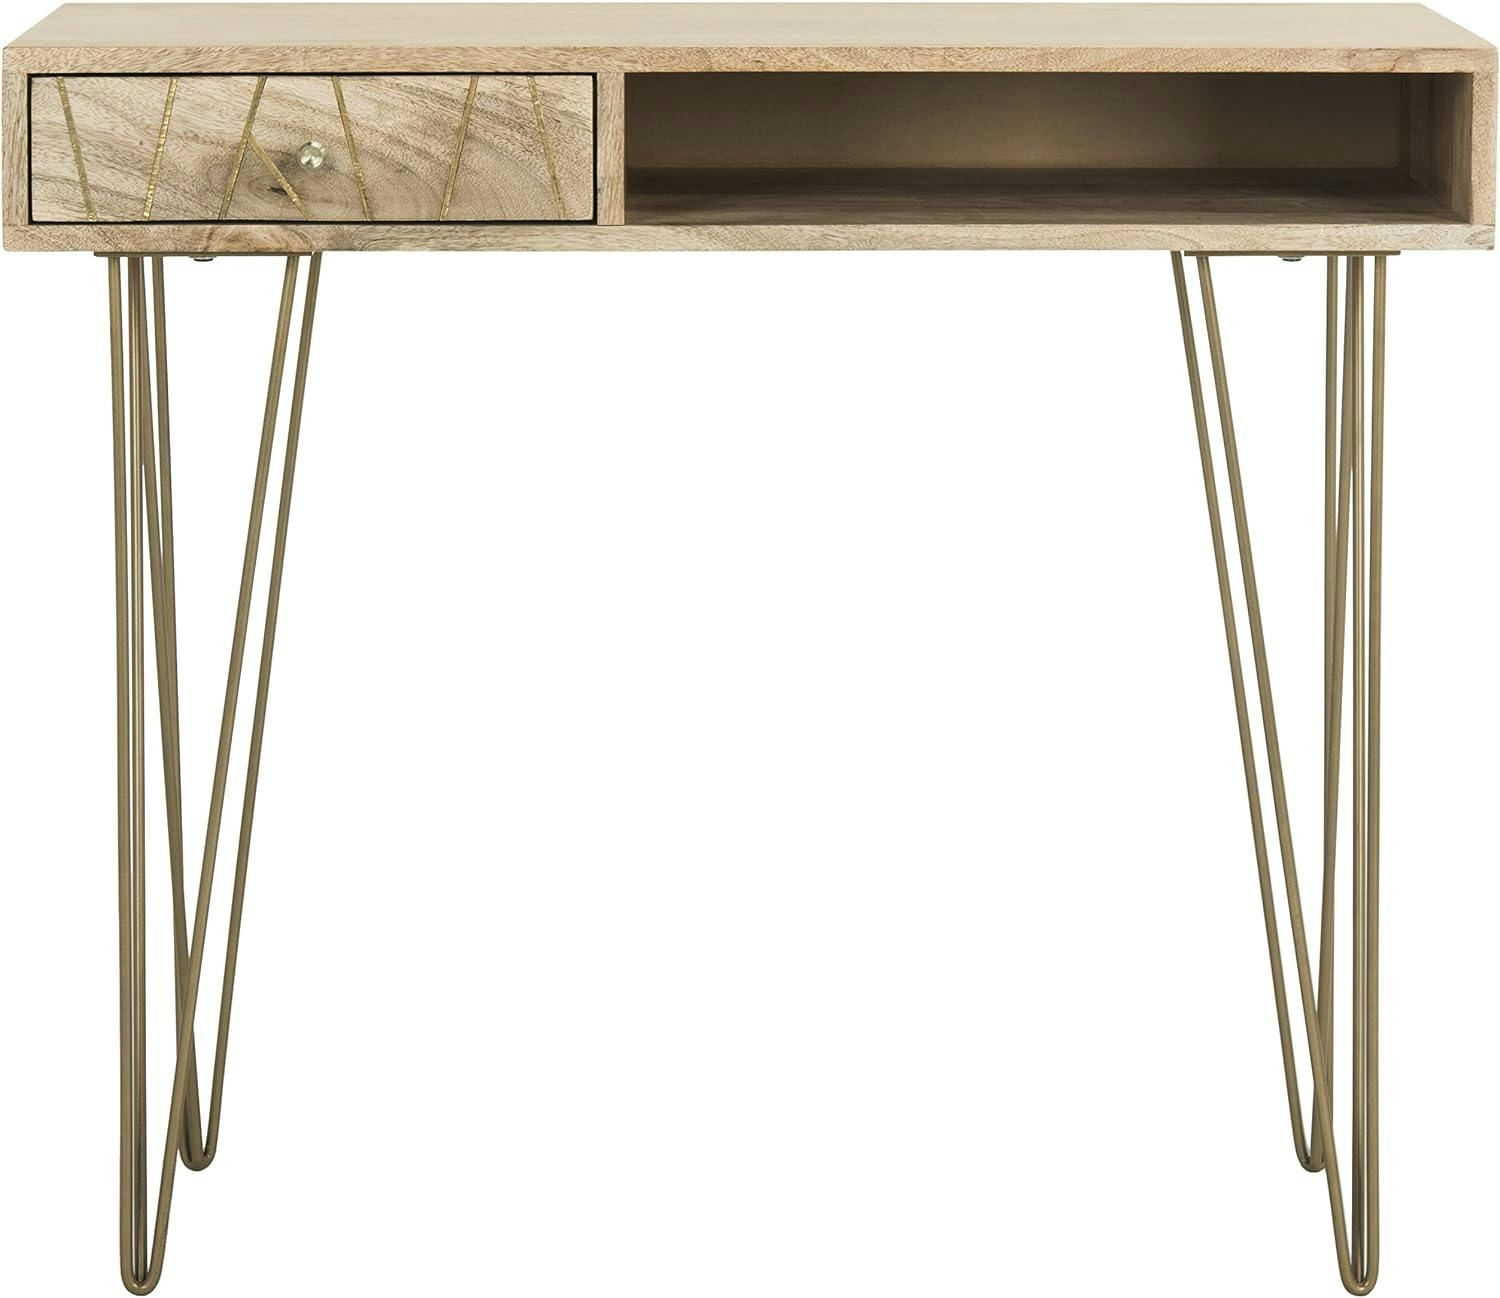 Transitional Beige Wood Home Office Desk with Drawer